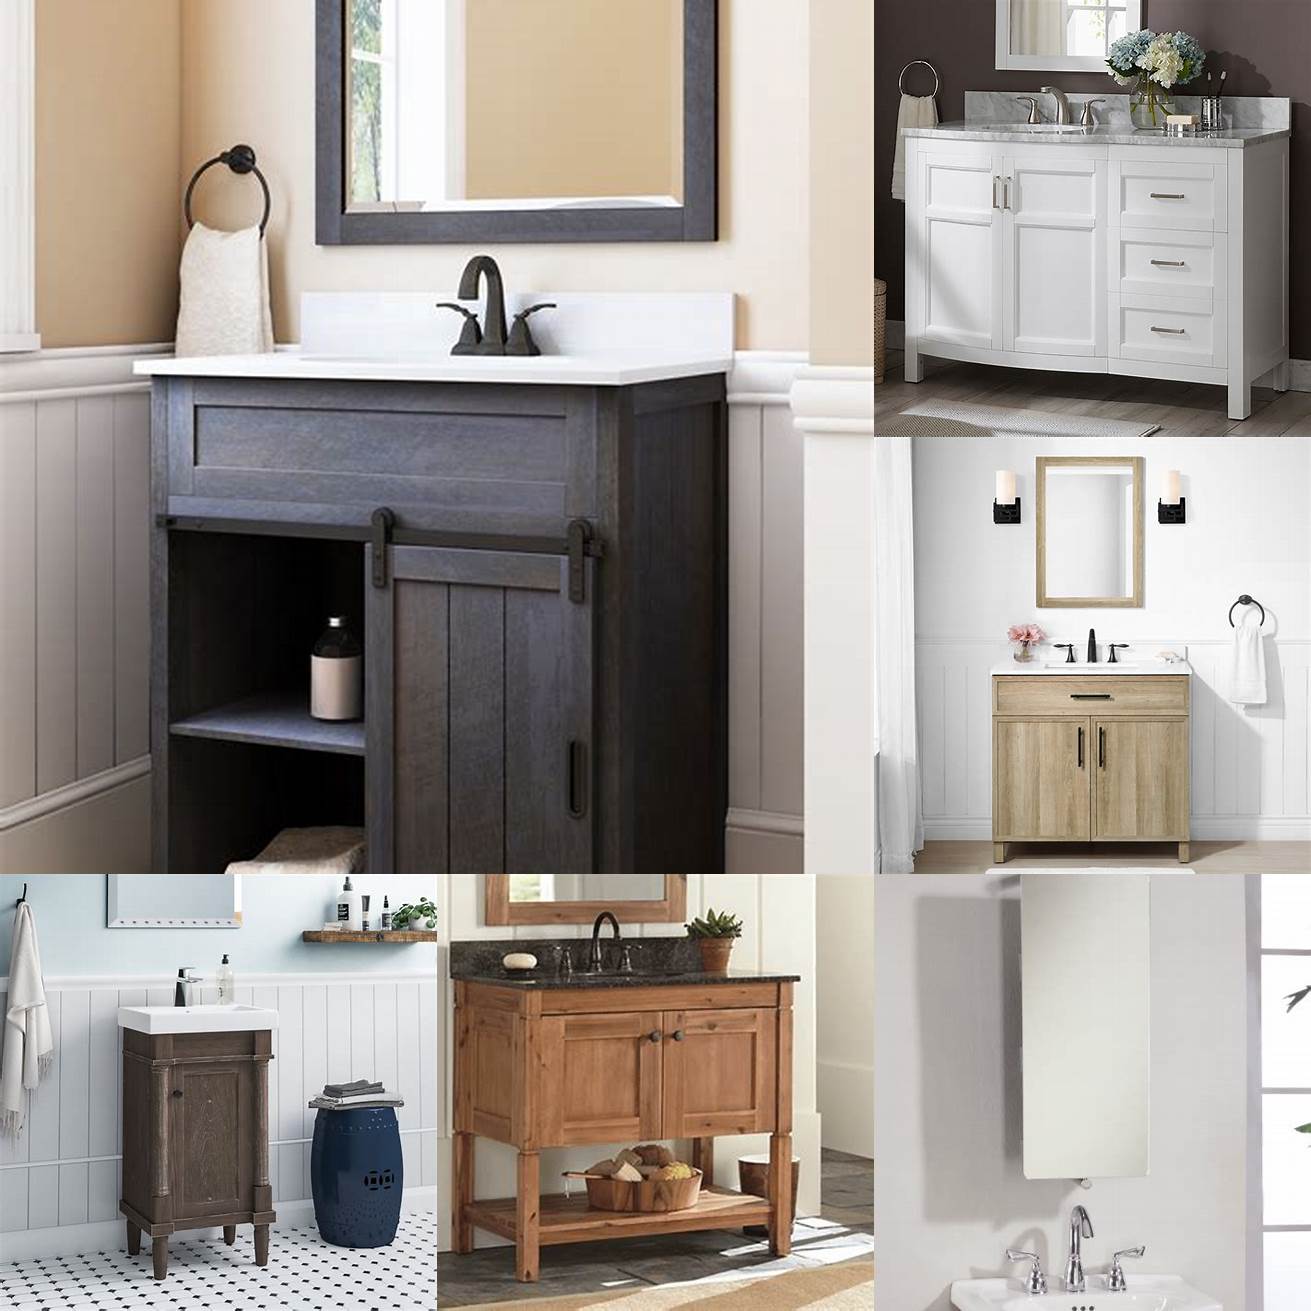 1 Home Improvement Stores Stores like Home Depot and Lowes carry a wide selection of bathroom vanities in a variety of styles and price points